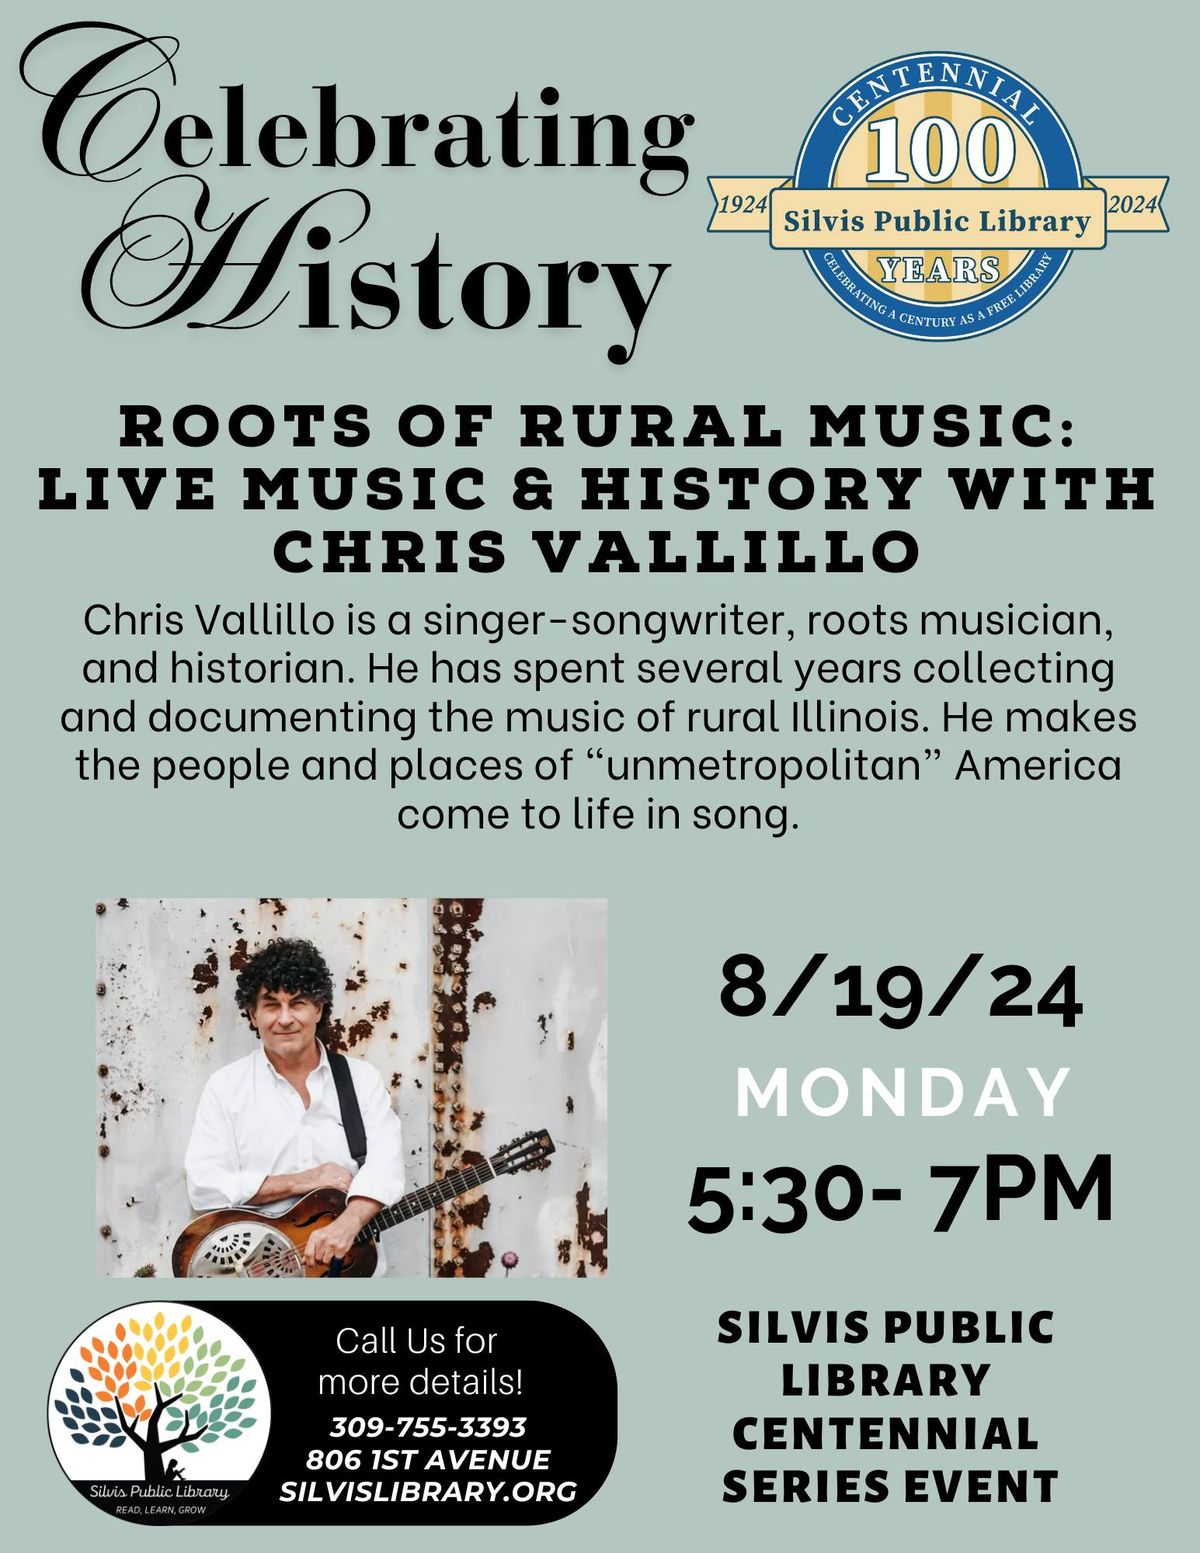 Celebrating History: Roots of Rural Music- Live Music & History with Chris Vallillo